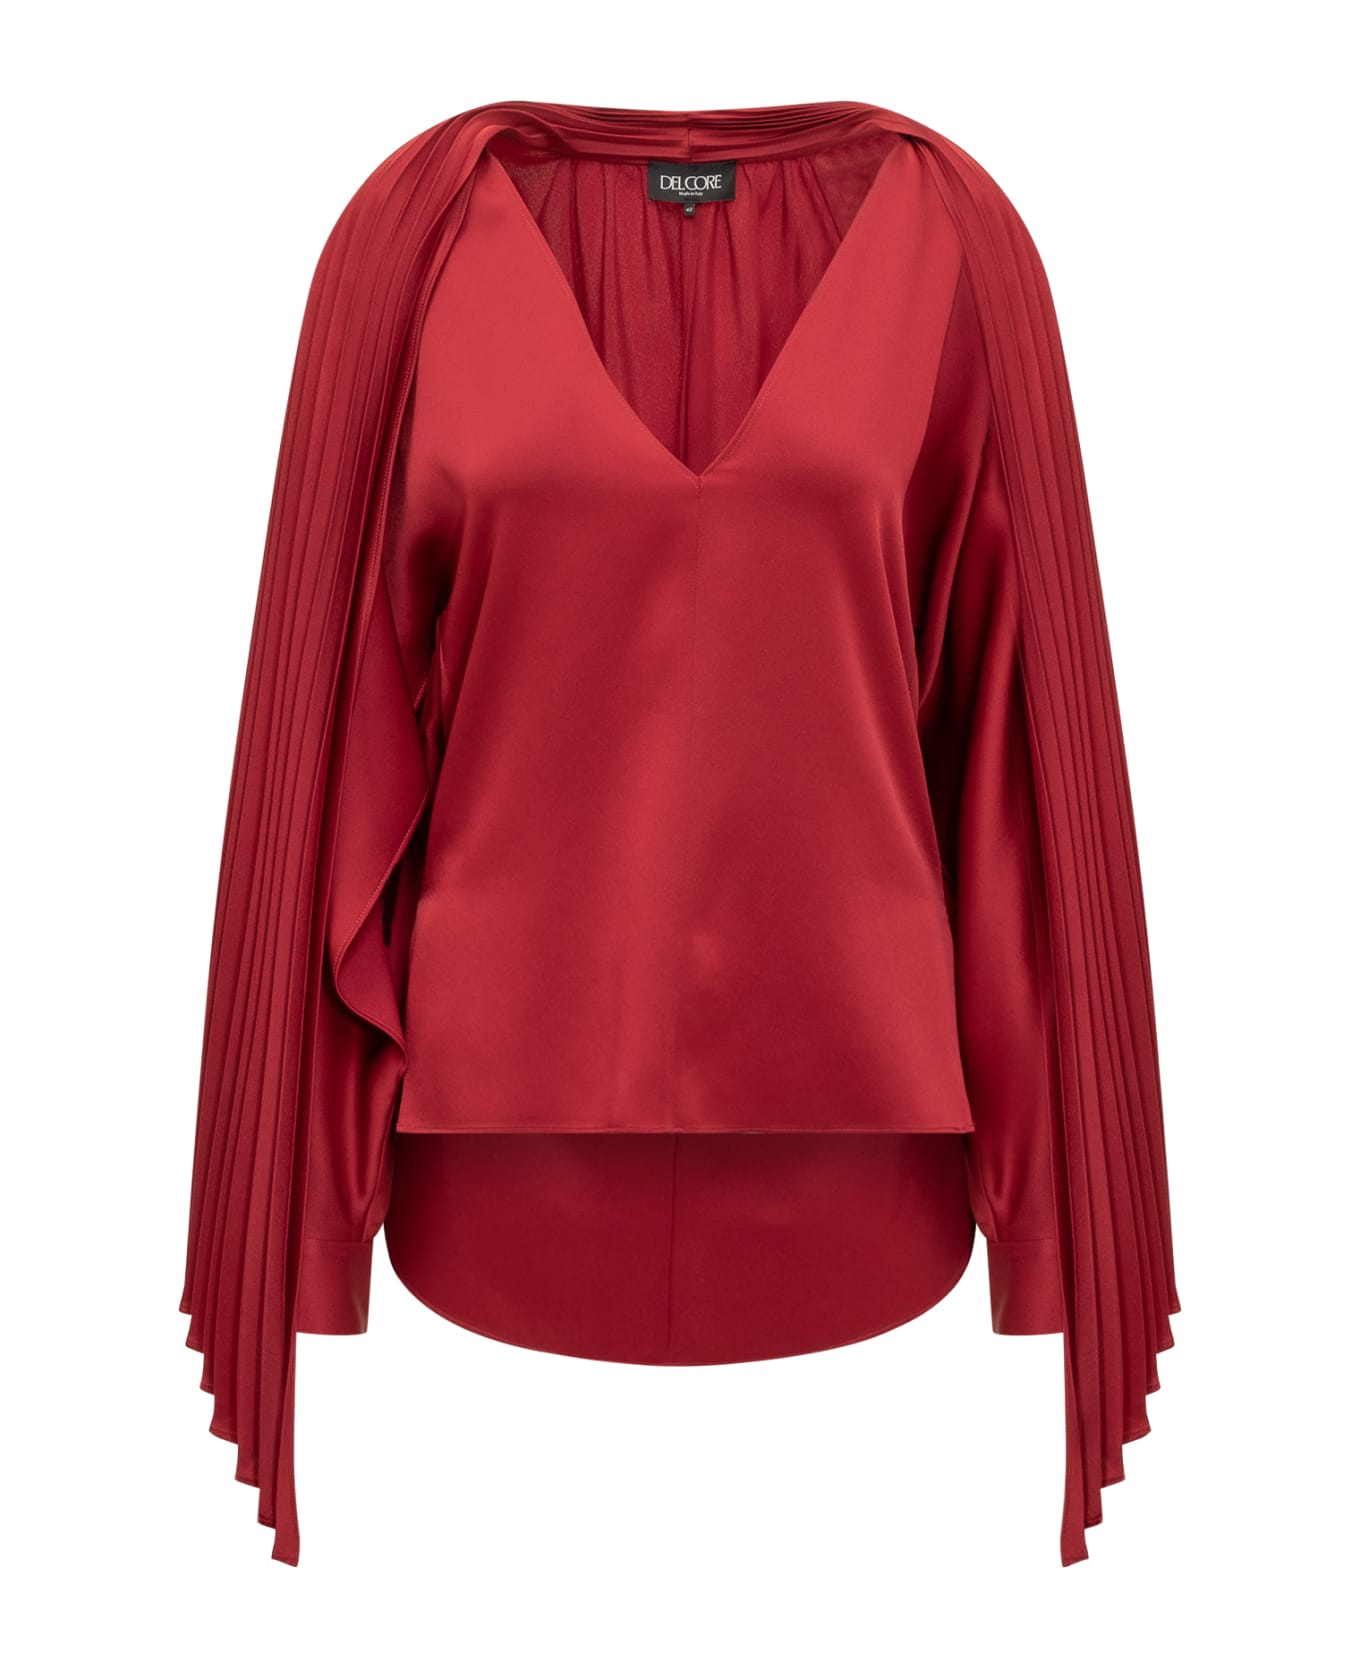 Del Core Draped Top With Scarf - BLOOD RED